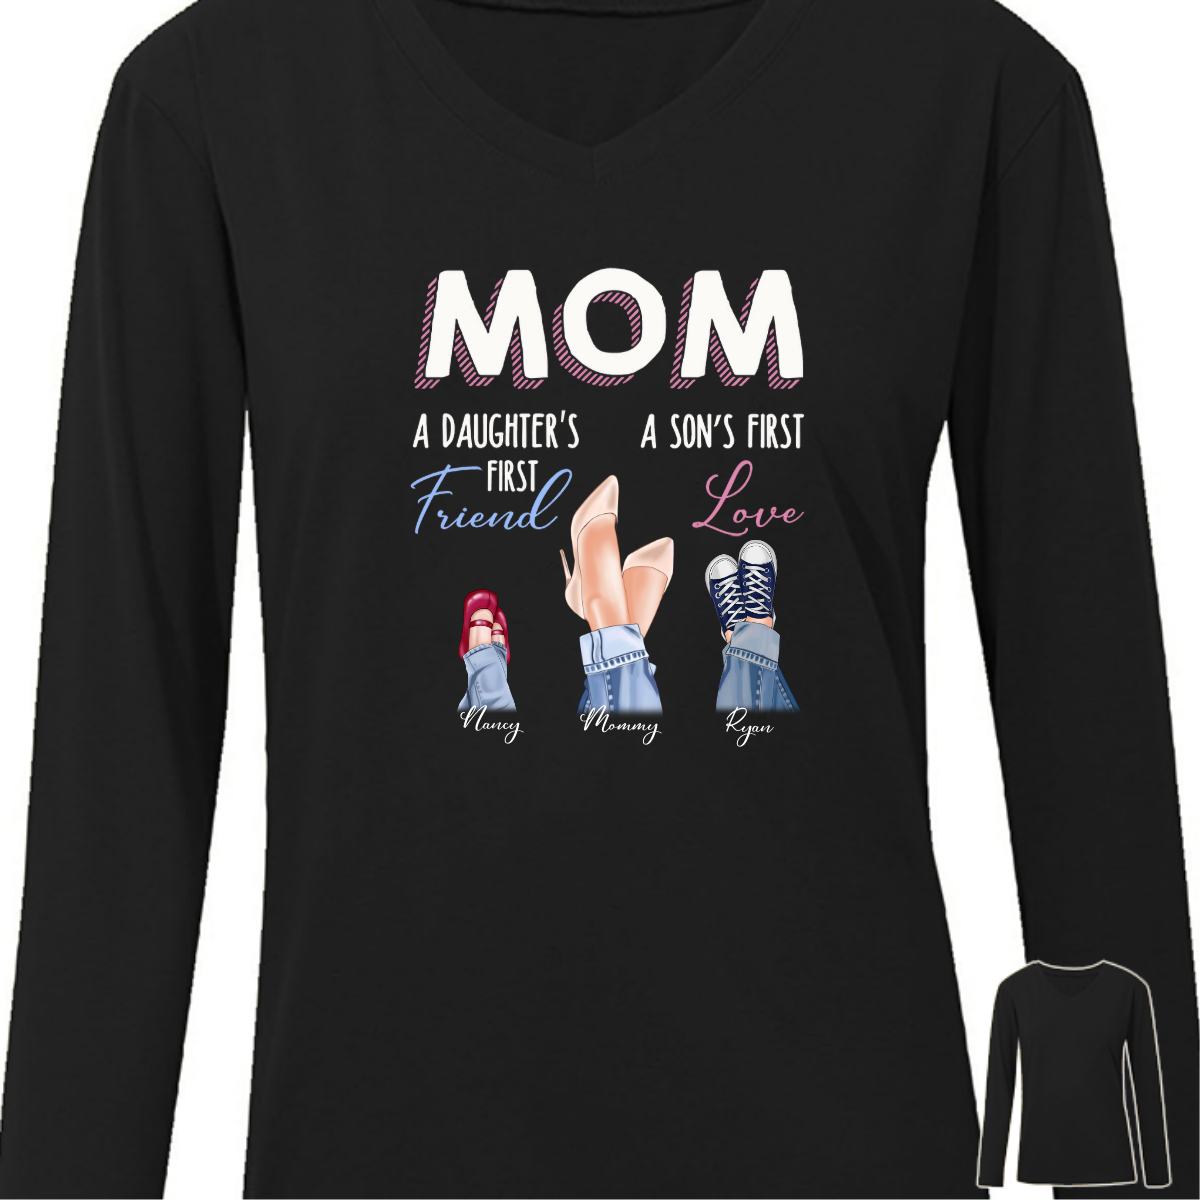 Mom Daughter First Friend Son First Love Personalized Long Sleeve Shirt